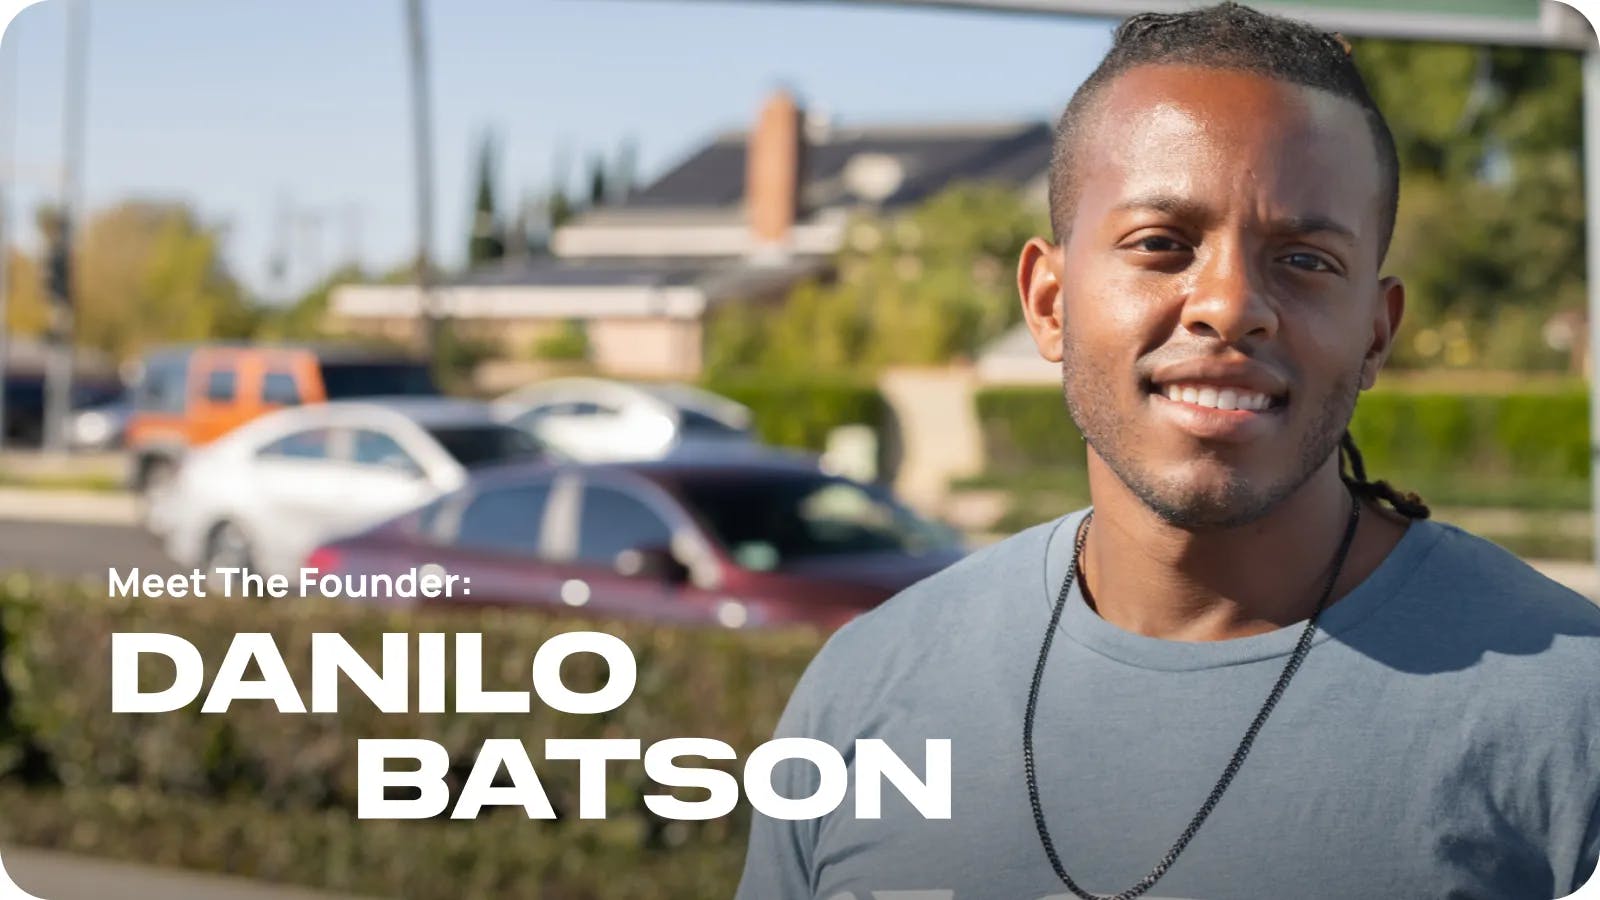 Meet the founder: Danilo Batson. Danilo Watson with cars in the background